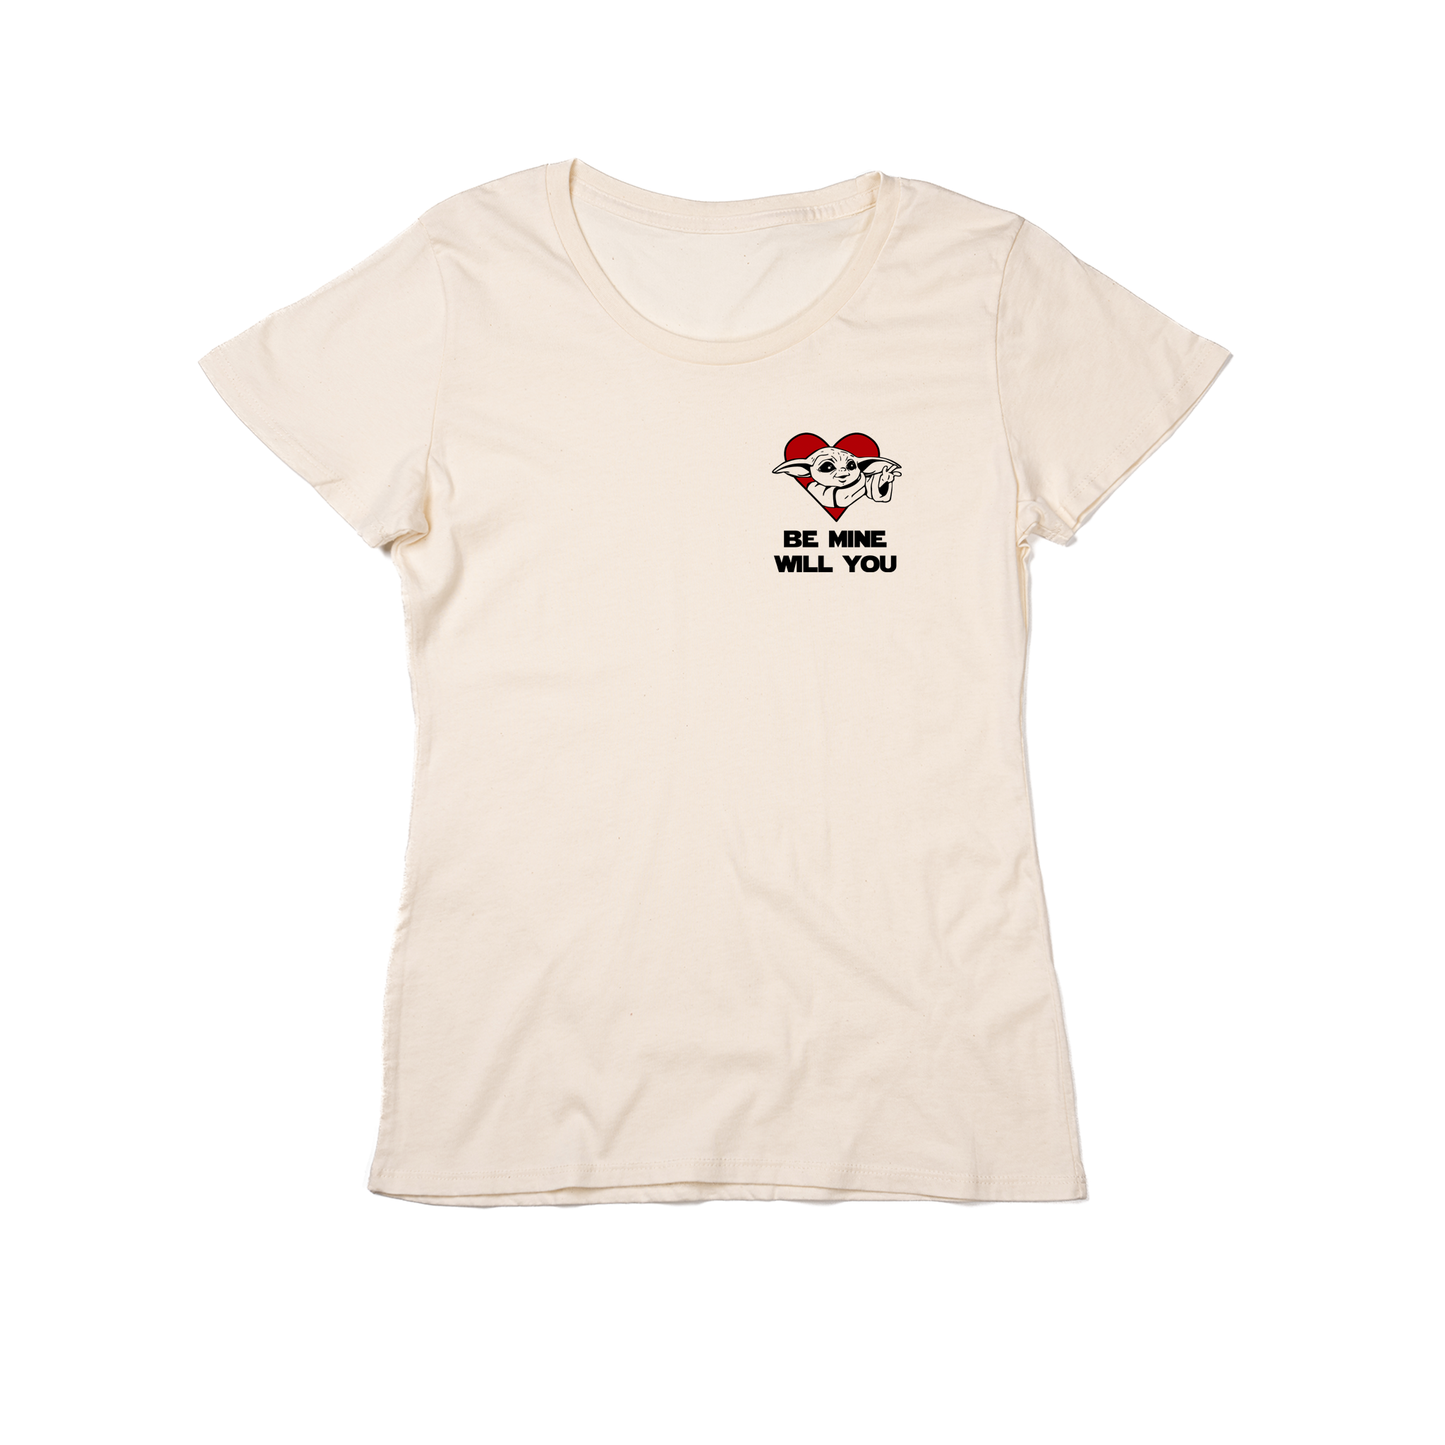 Be Mine Will You (Baby Yoda Inspired, Pocket) - Women's Fitted Tee (Natural)